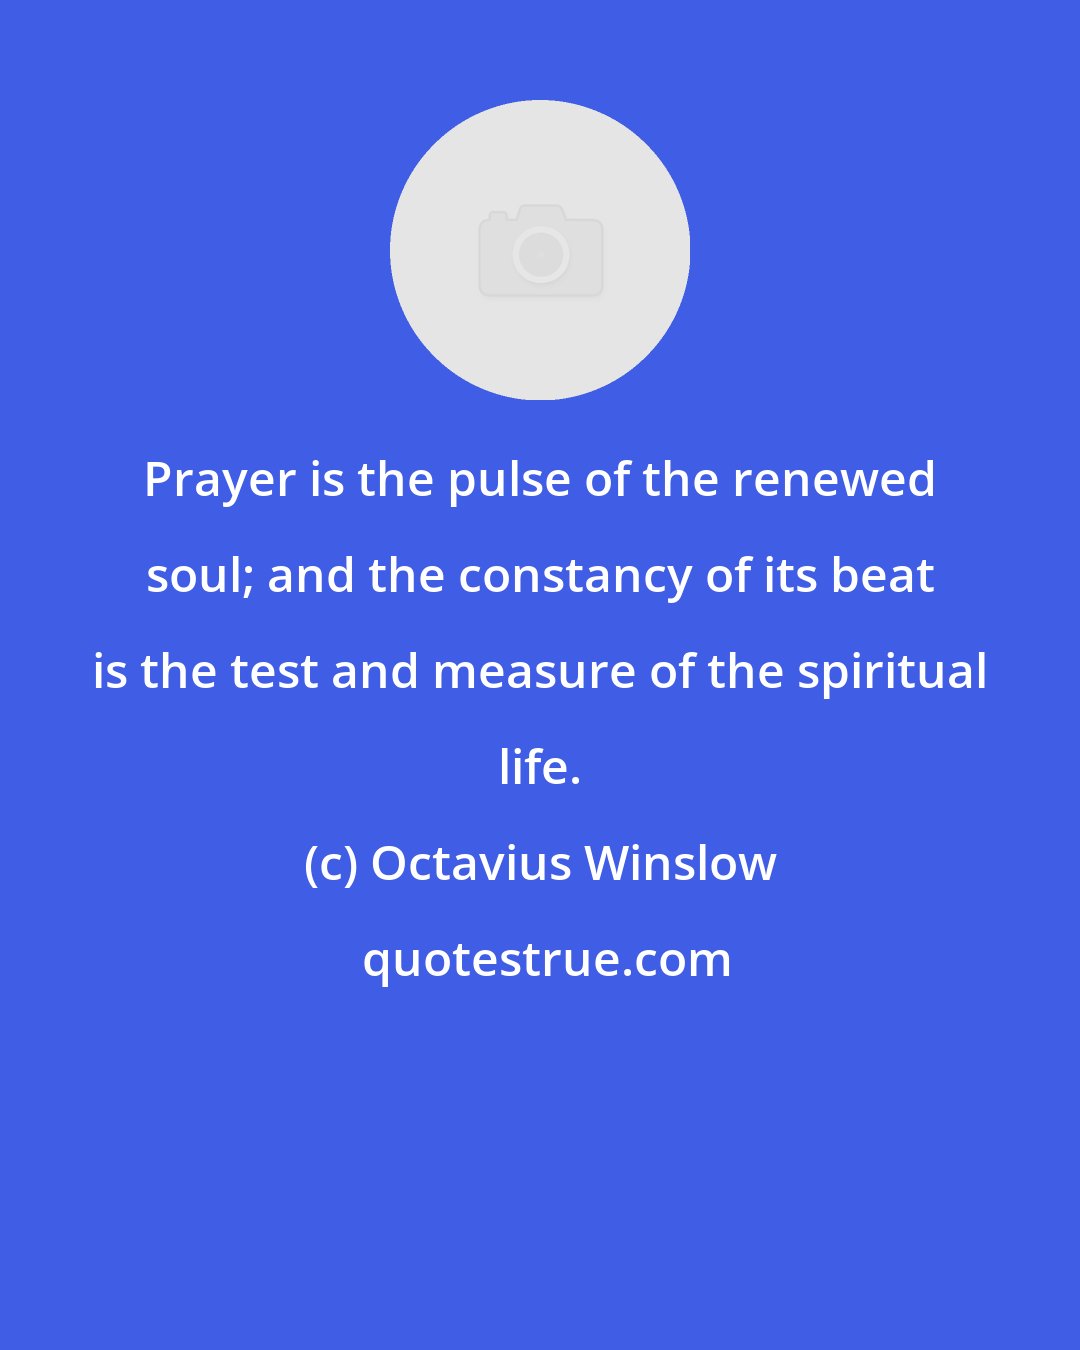 Octavius Winslow: Prayer is the pulse of the renewed soul; and the constancy of its beat is the test and measure of the spiritual life.